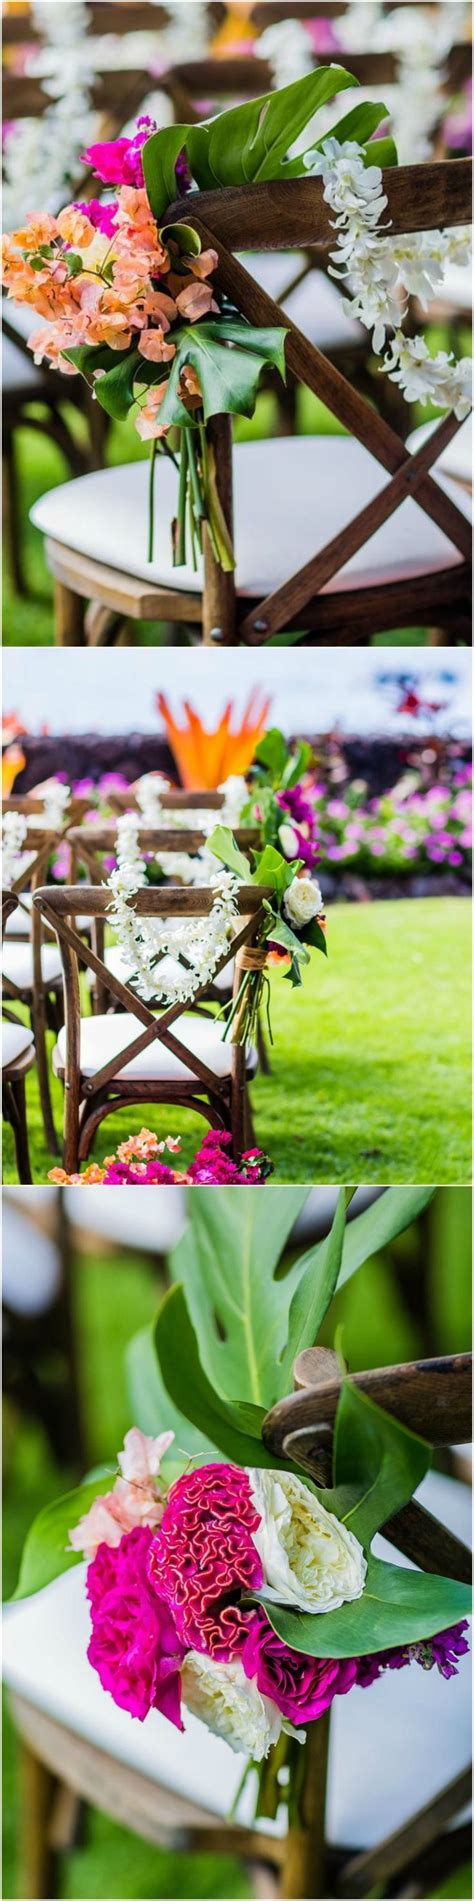 Dgreetings.com offers unique online idea of tropical wedding flower bouquets, centerpieces. awesome Hawaii wedding, ceremony seating, chair décor ...